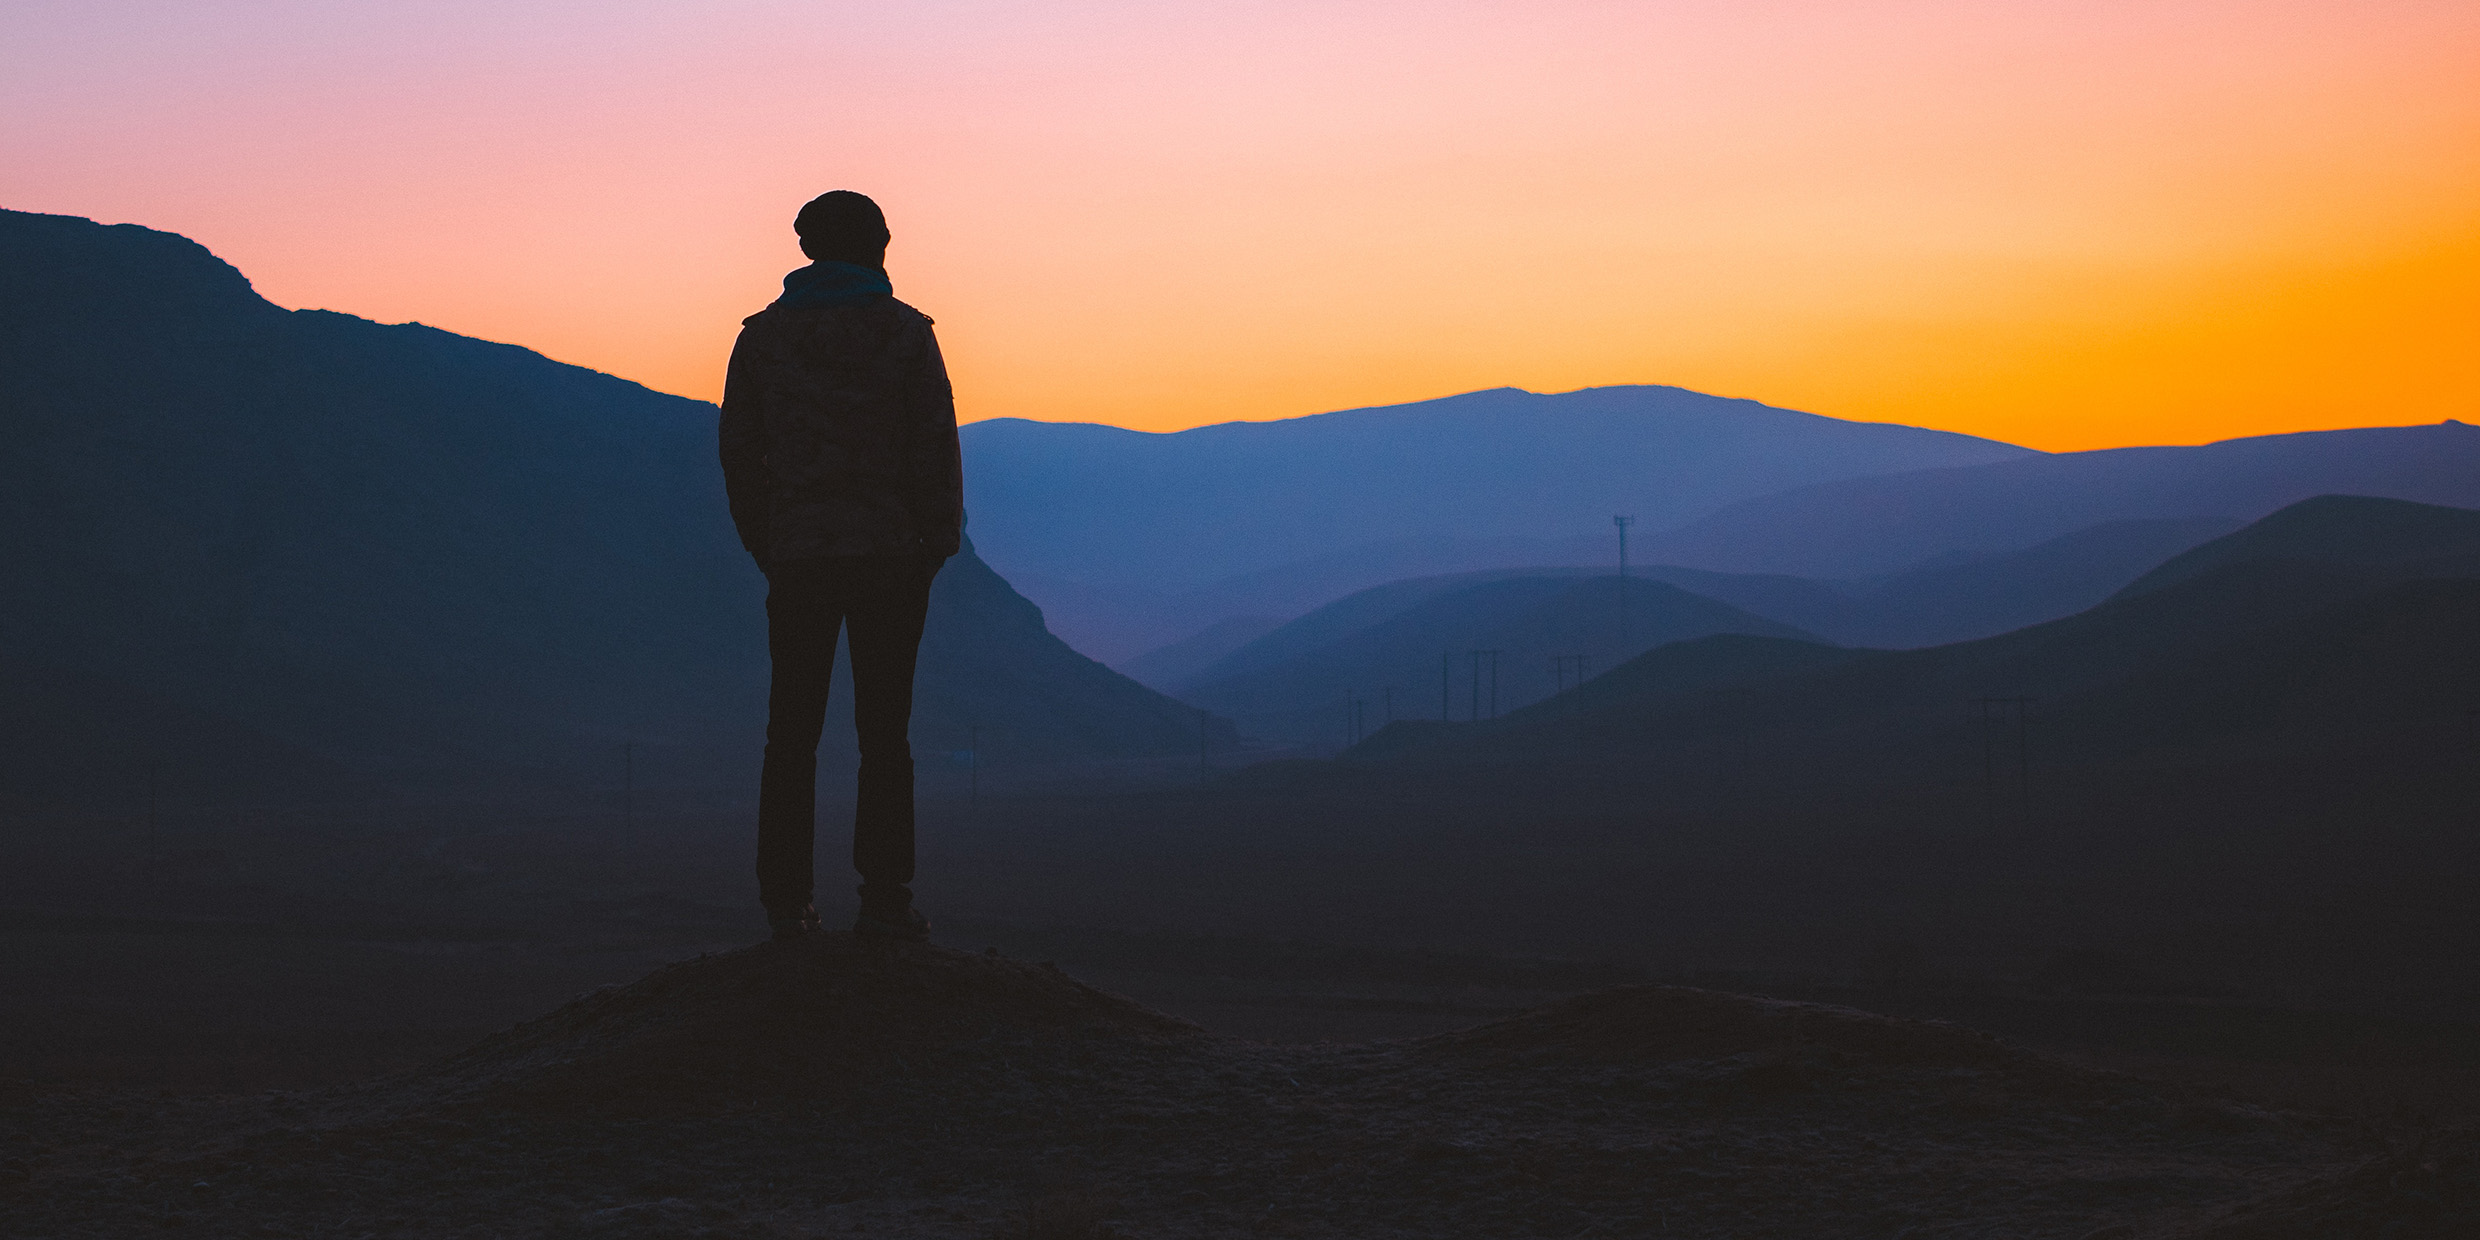 Image of a man silhouetted by the dawn sky